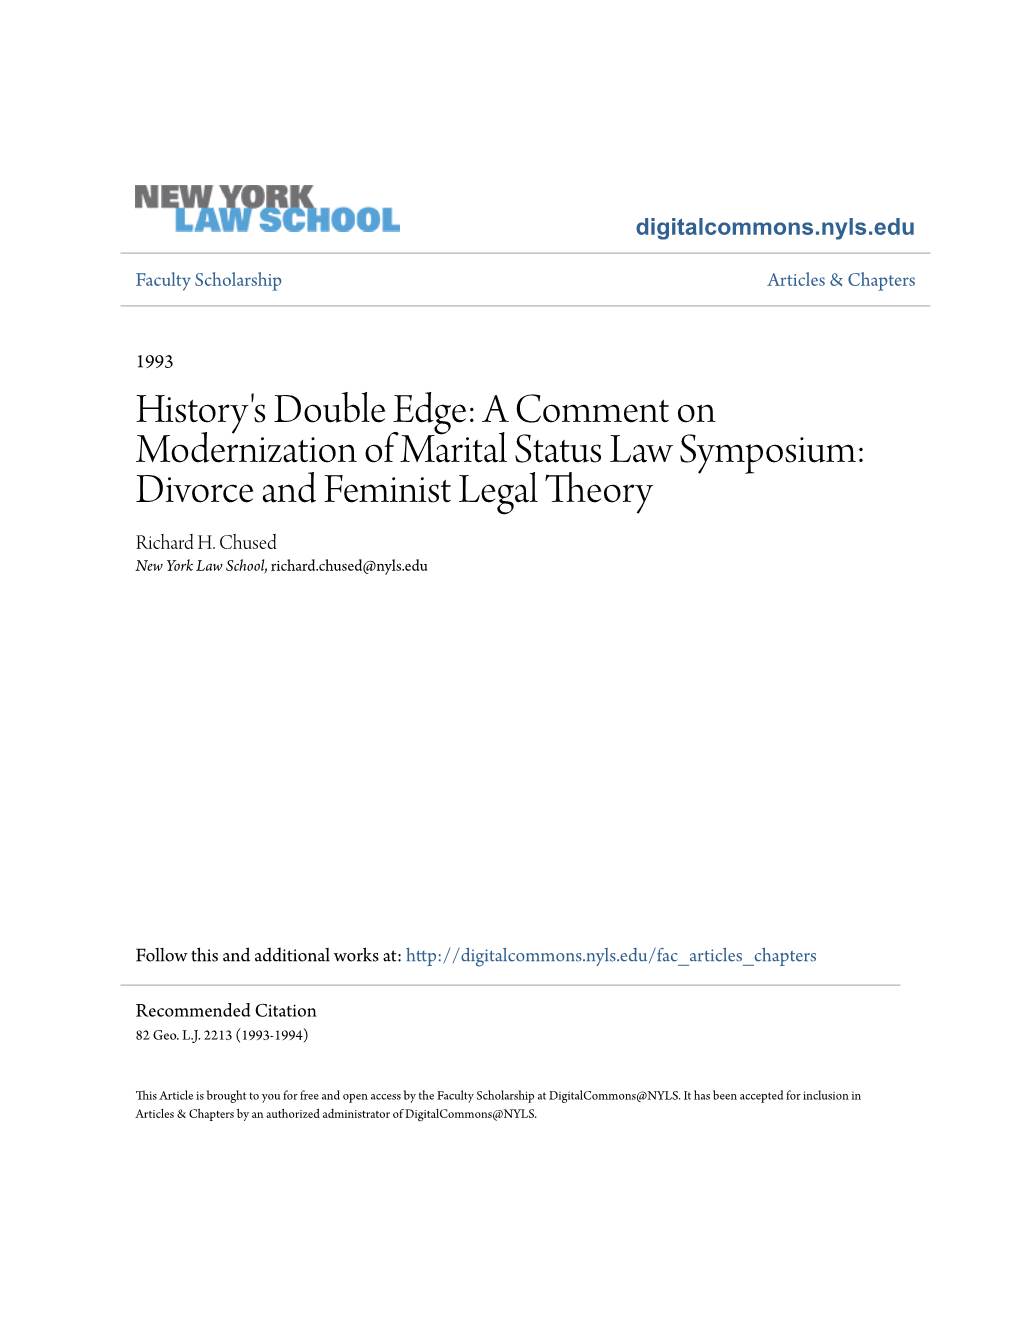 History's Double Edge: a Comment on Modernization of Marital Status Law Symposium: Divorce and Feminist Legal Theory Richard H